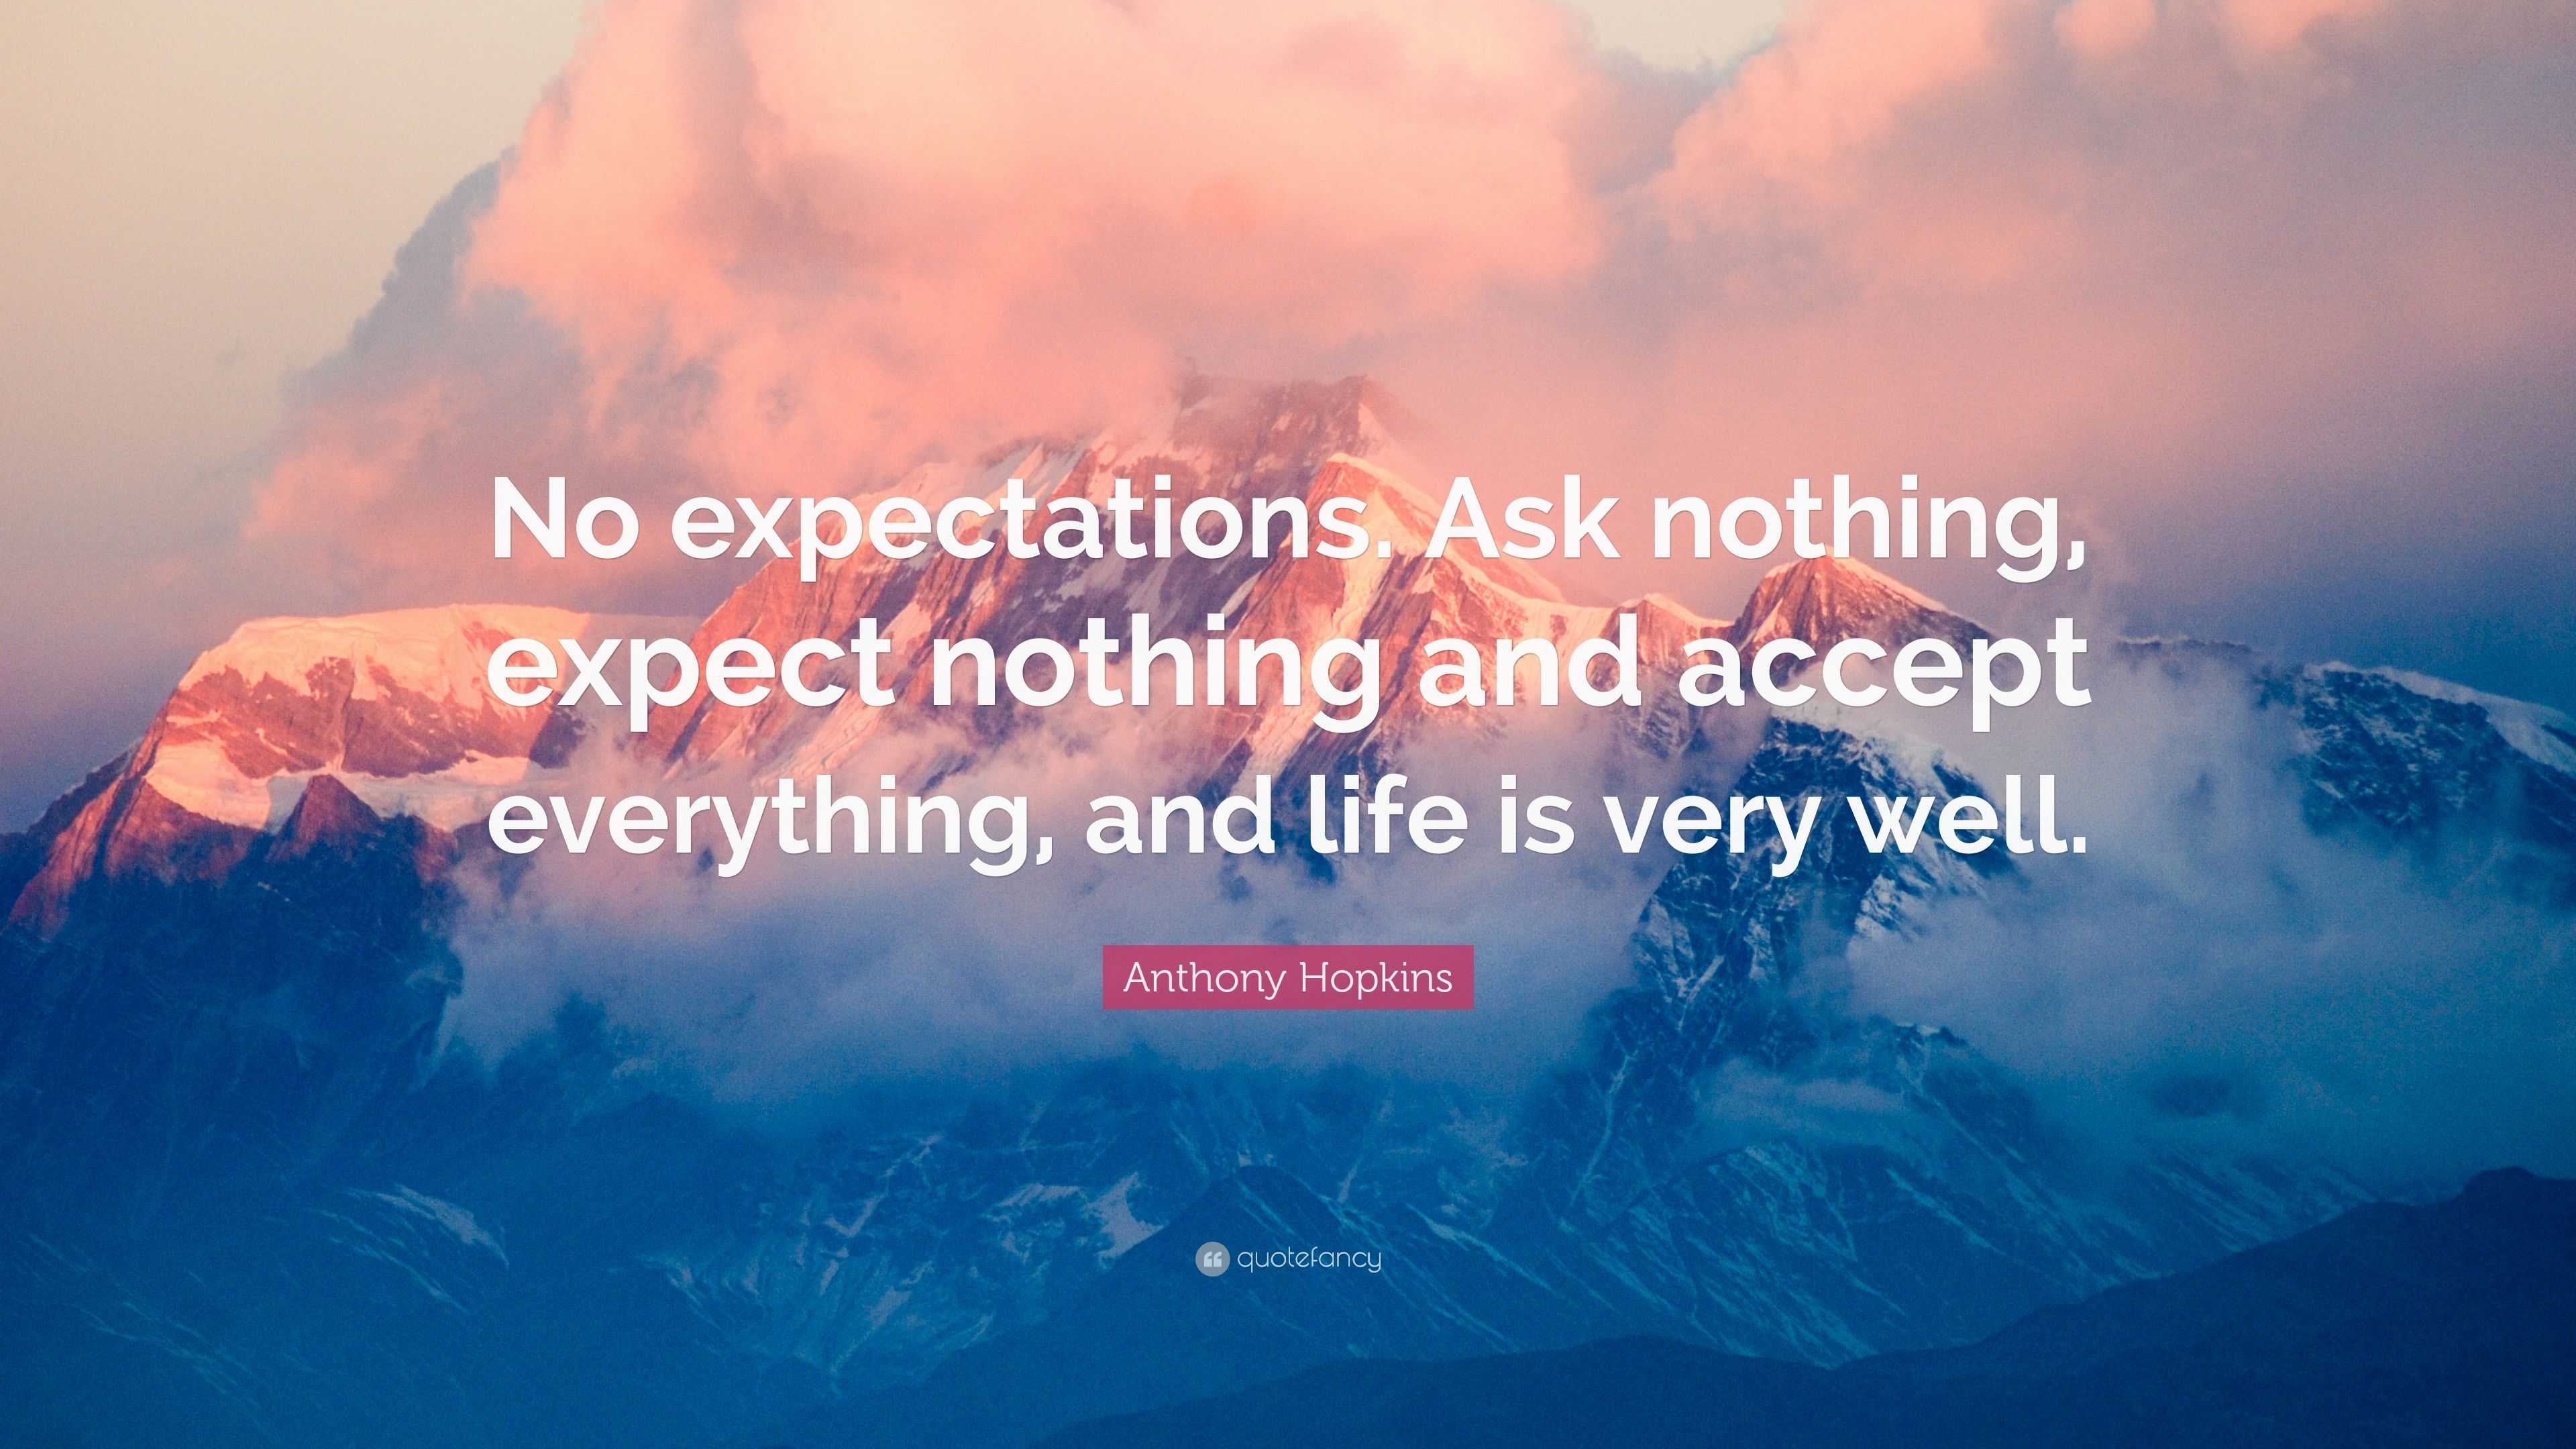 Anthony Hopkins Quote “No expectations. Ask nothing, expect nothing